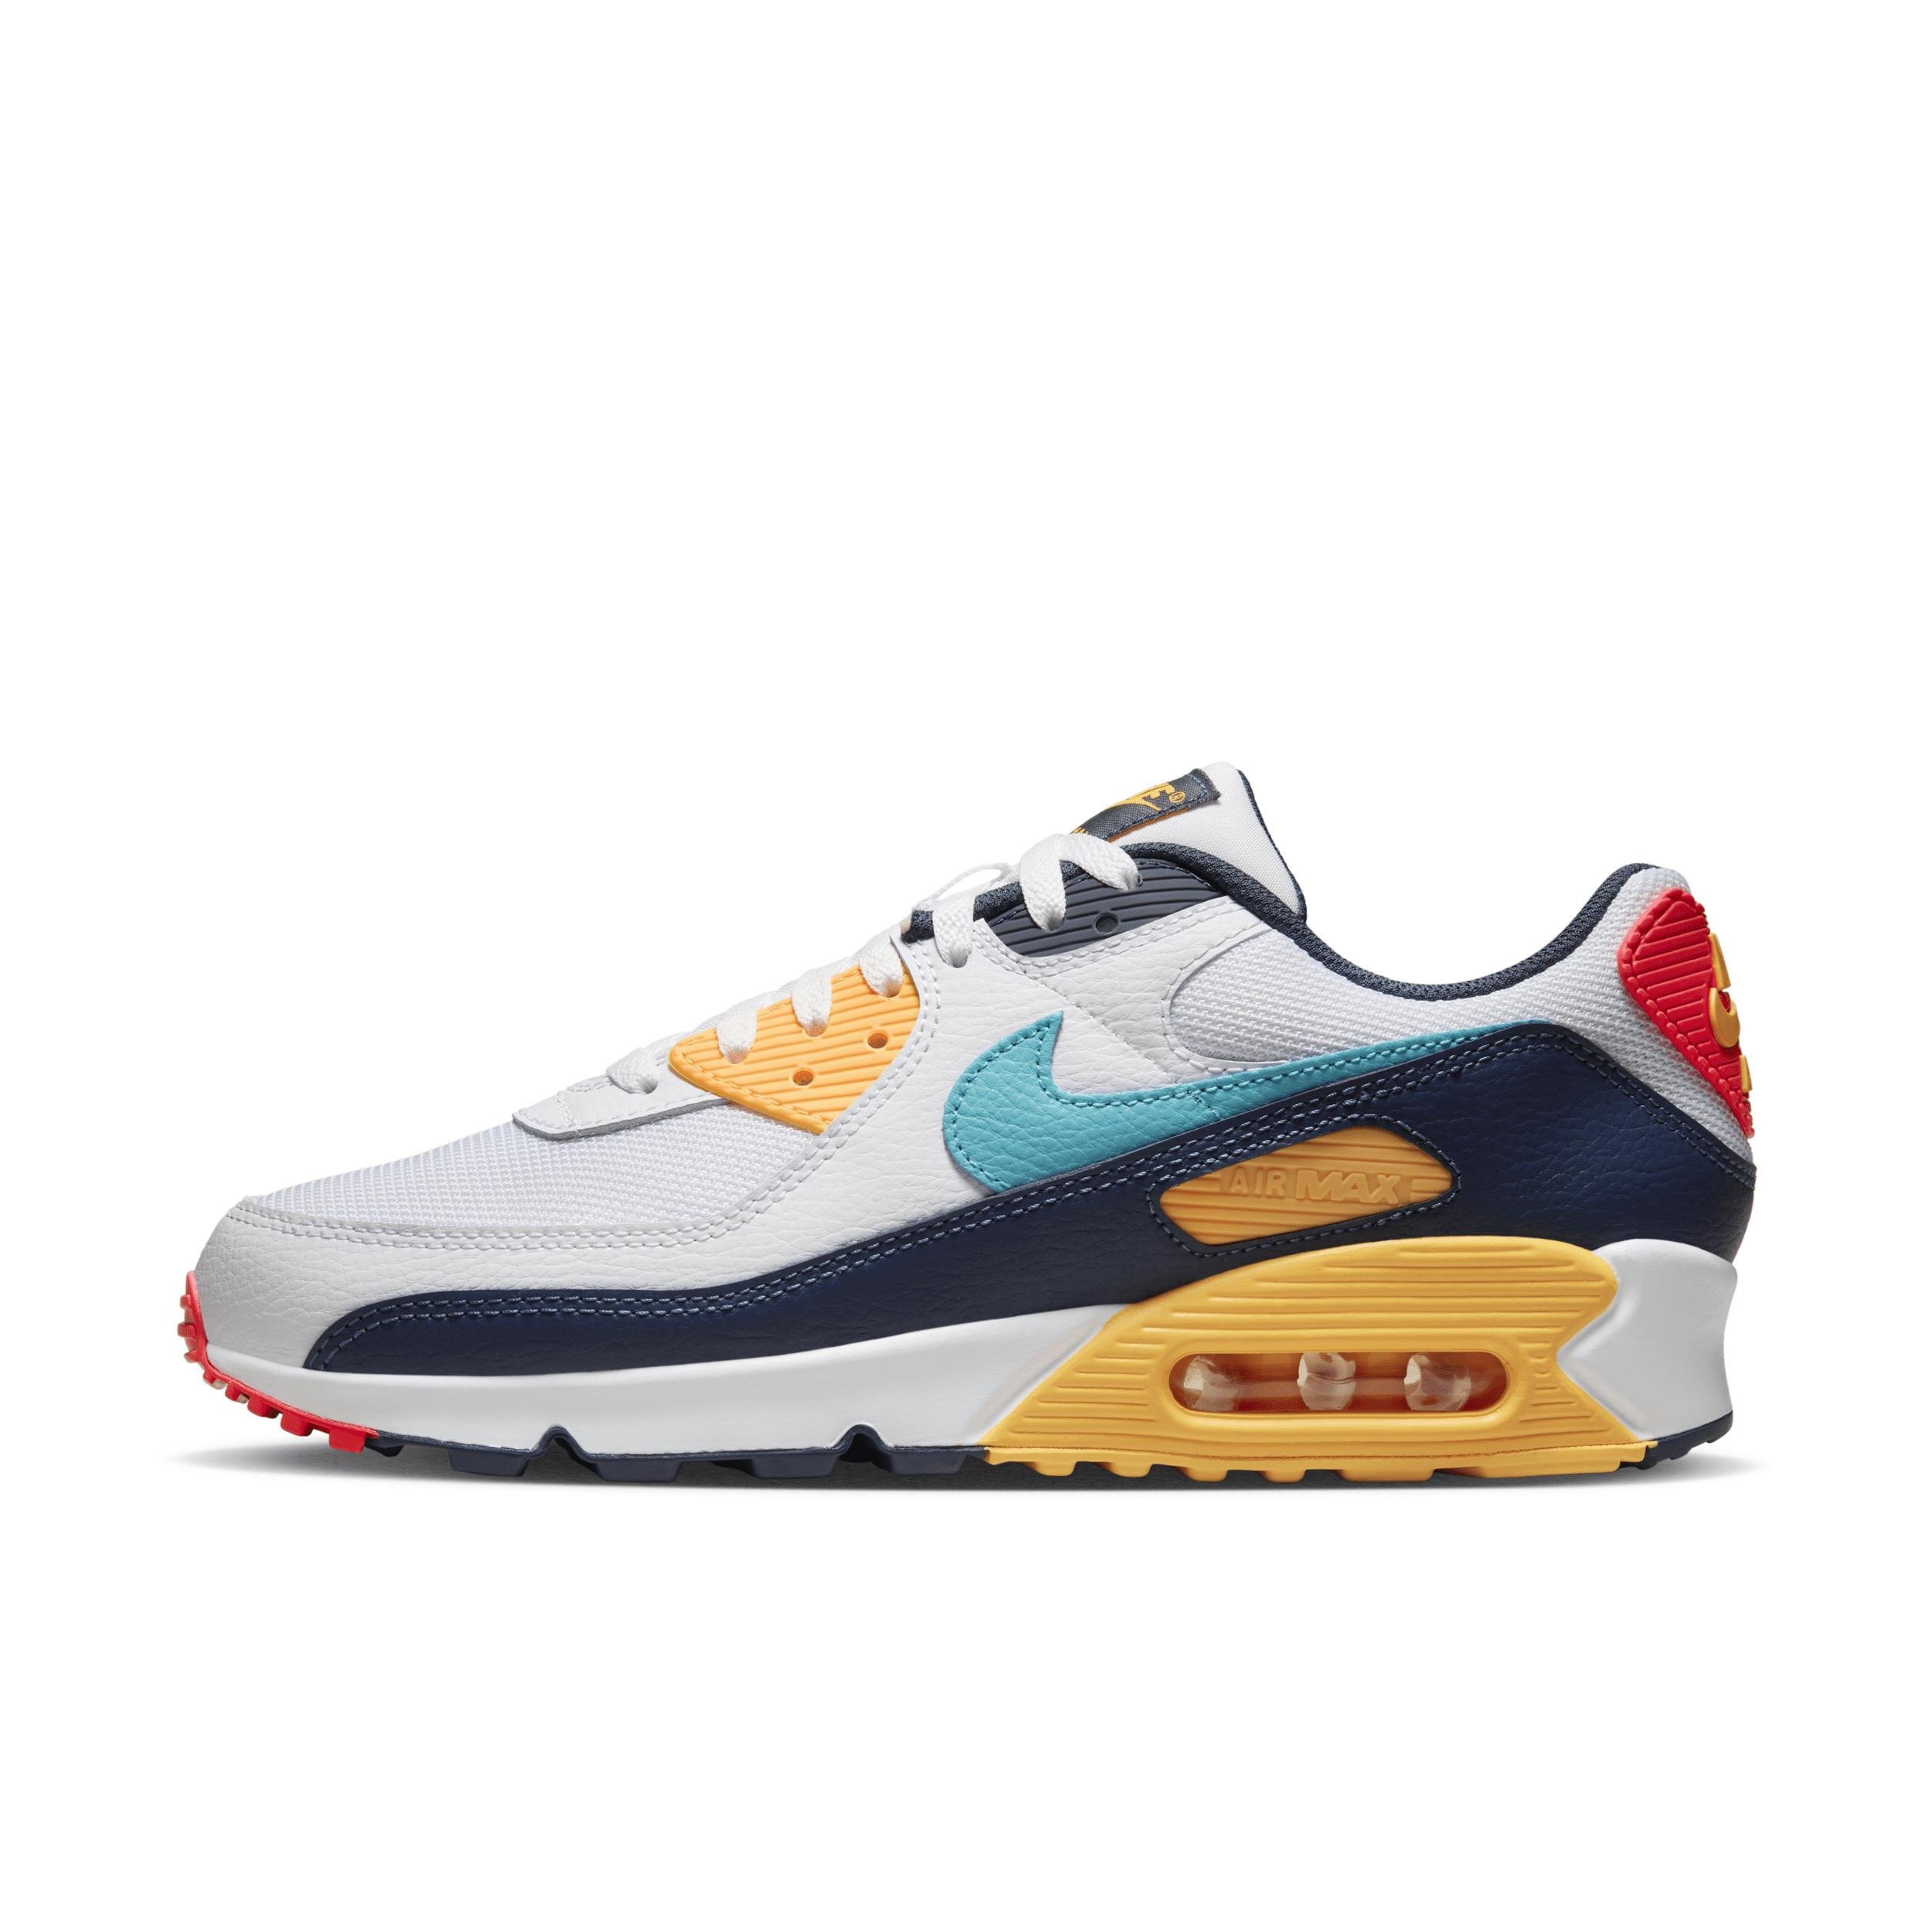 Nike Men's Air Max 90 Shoes by NIKE